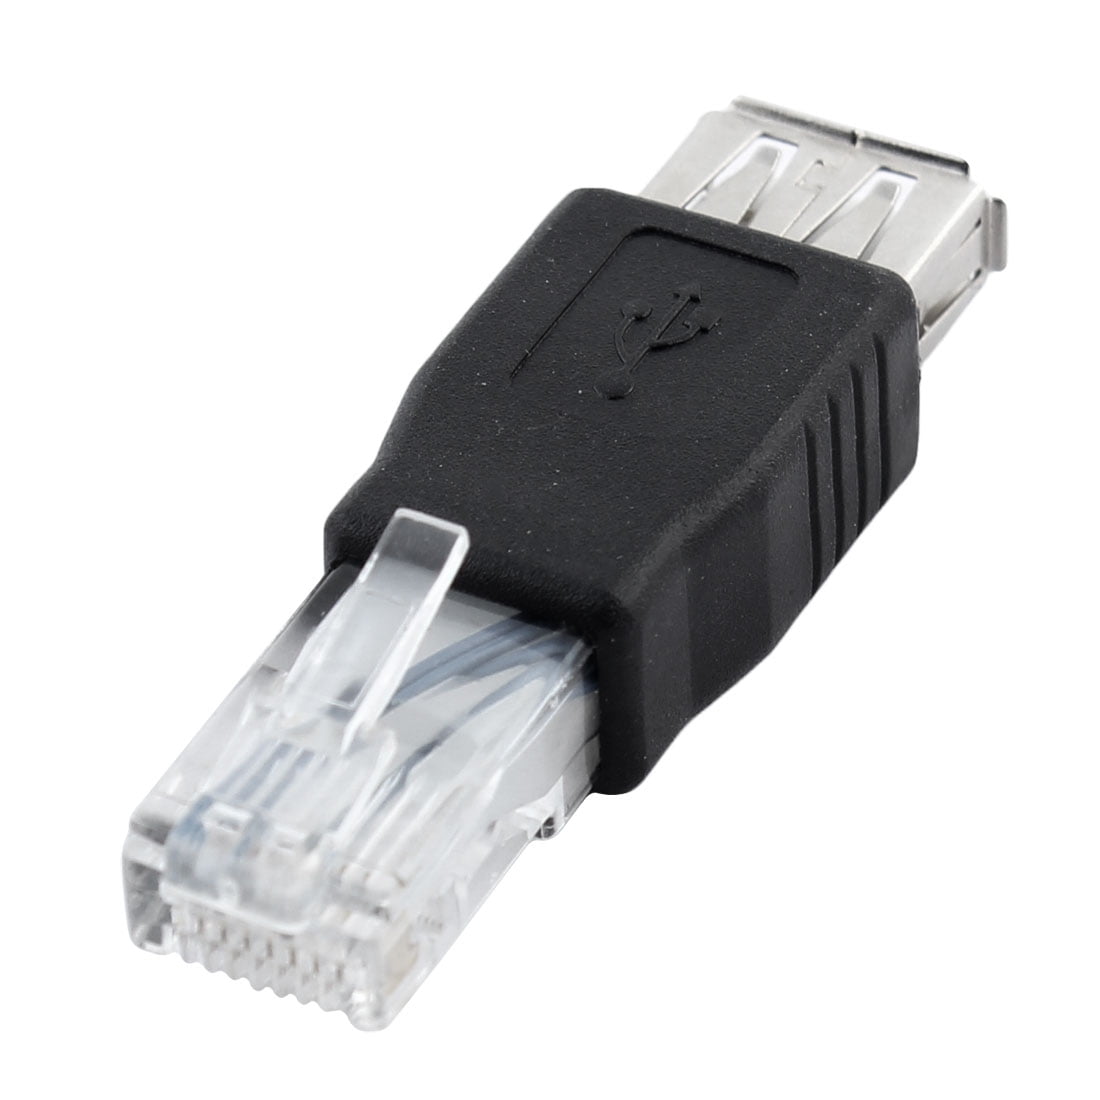 USB 2.0 Female to RJ45 Male Ethernet Adapter Converter Connector .